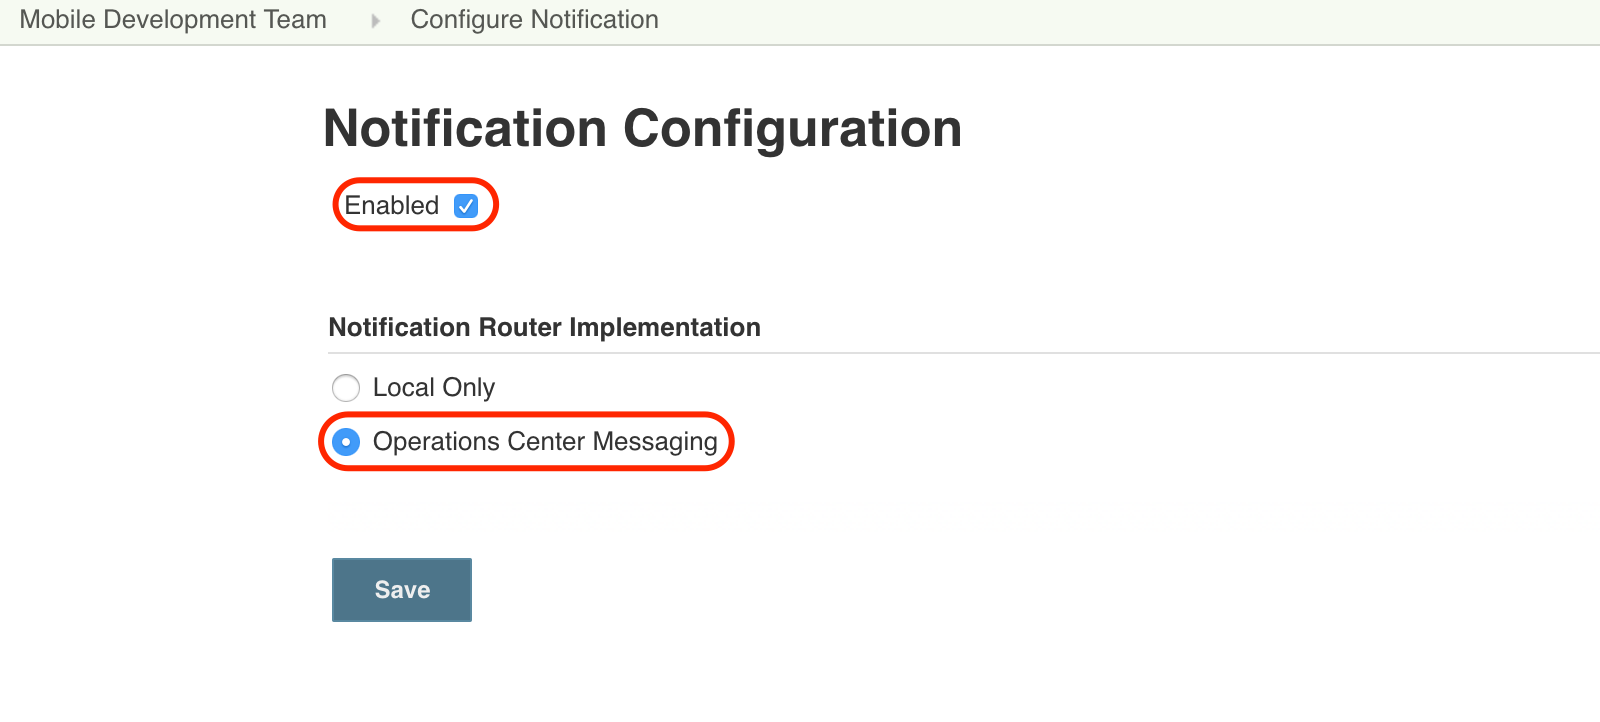 Confirming Notification settings, enabled selected, operations center messaging selected